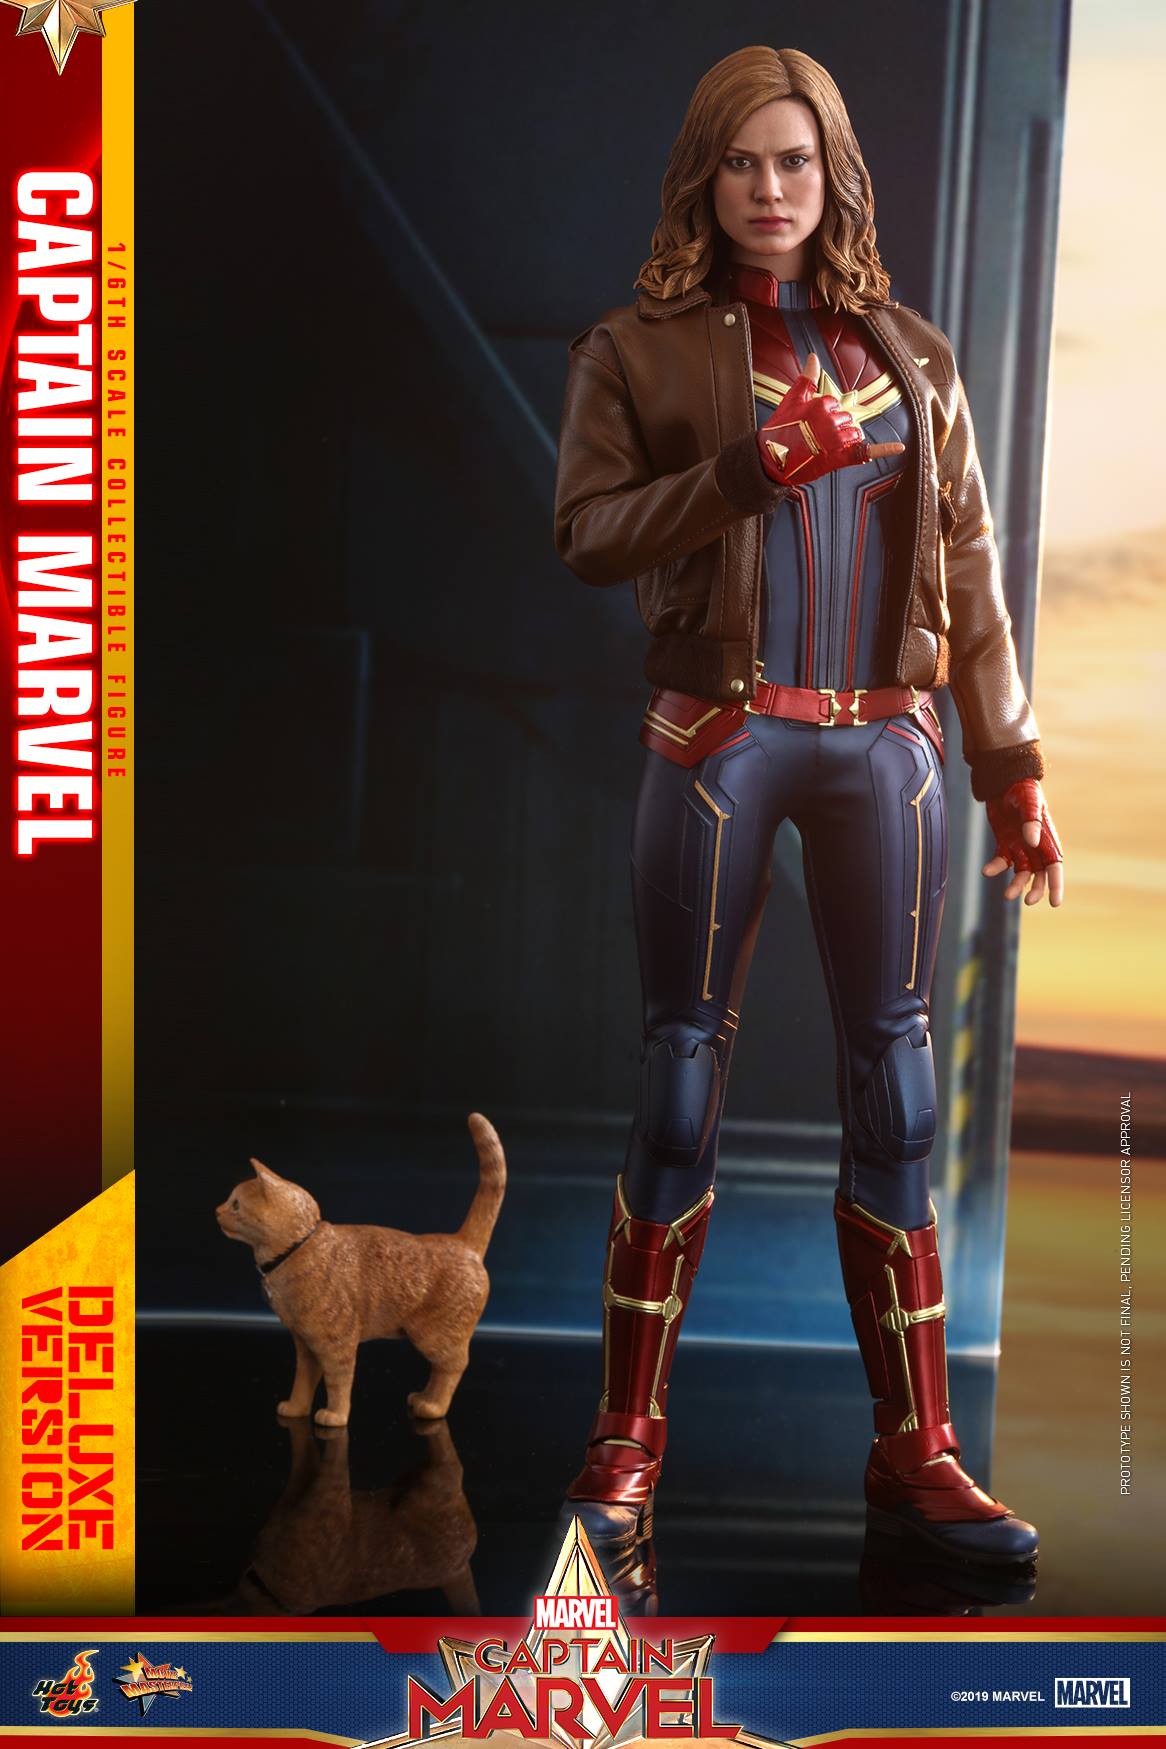 HOT TOYS MARVEL 1:6 CAPTAIN MARVEL 12" SIXTH SCALE ACTION FIGURE UK STOCK 